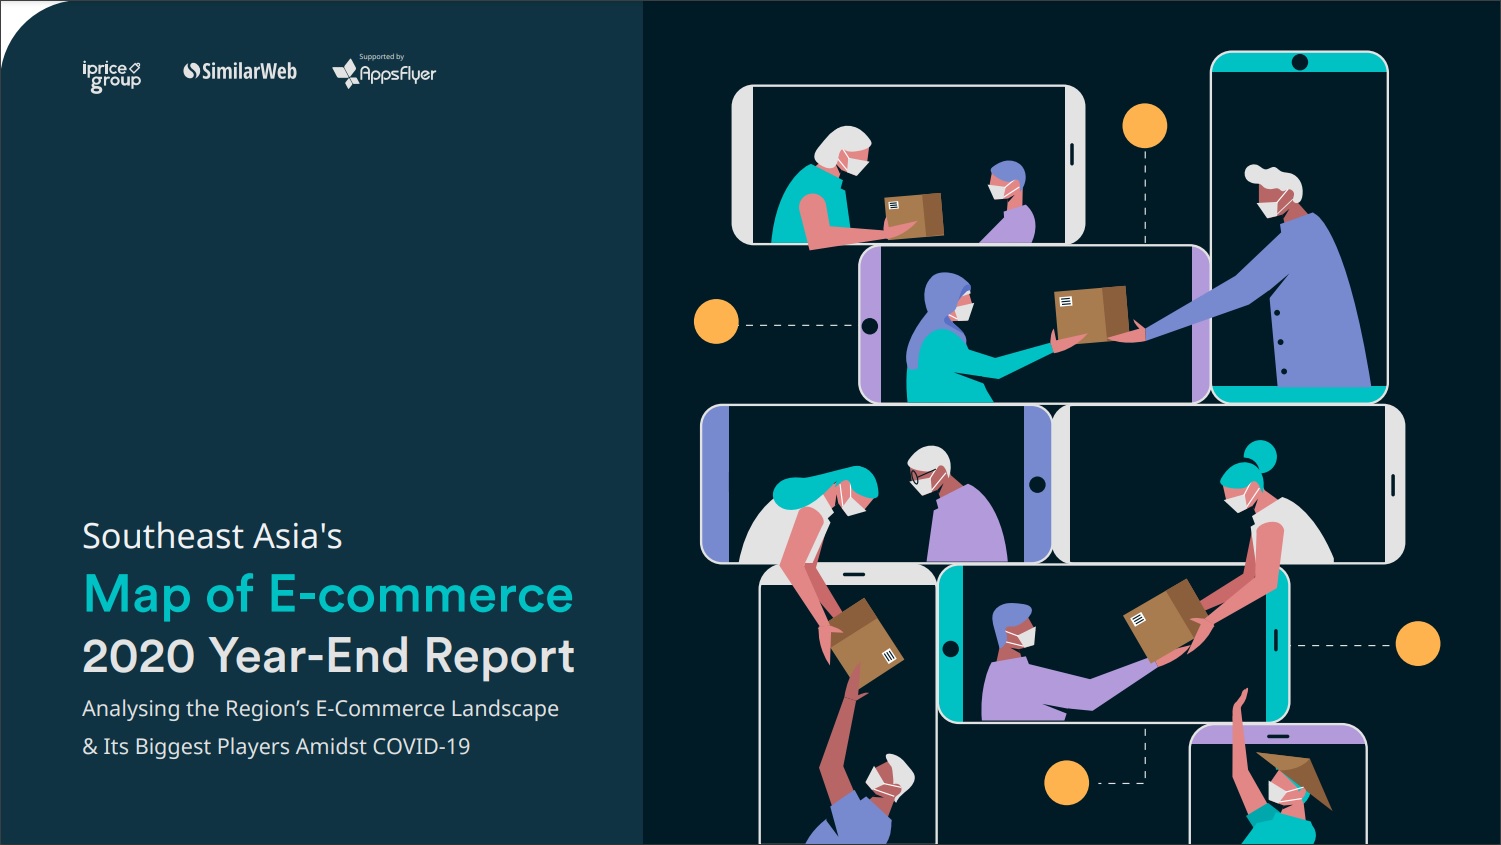 Covid-19 accelerated online shopping, consumer spending: iPrice 